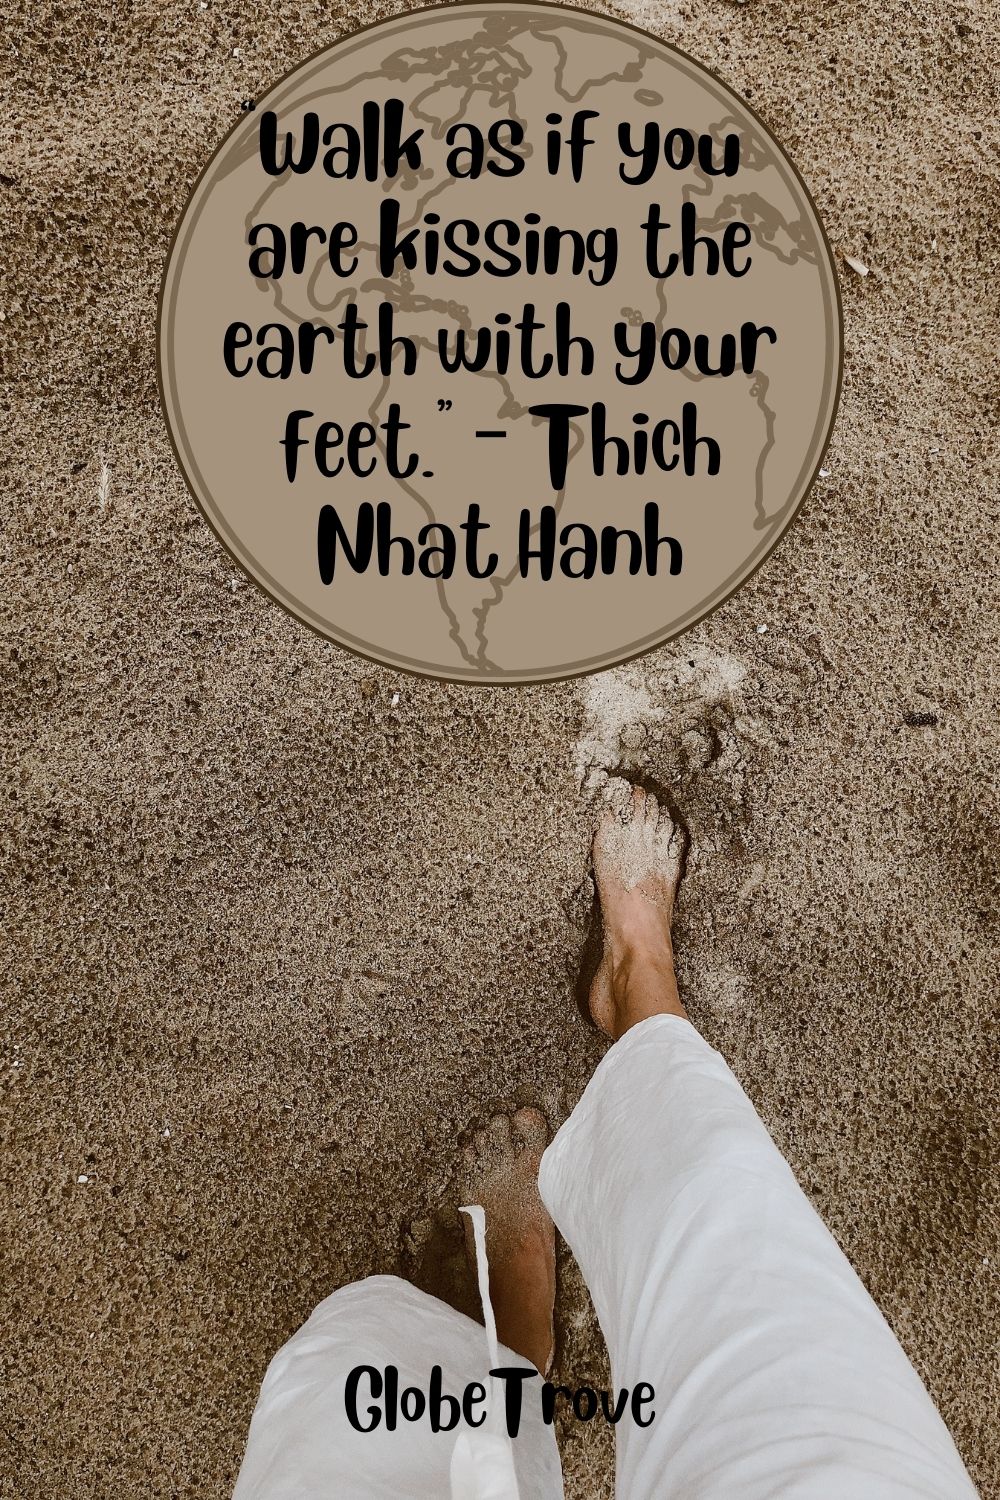 70 Inspiring Walking Captions And Quotes - GlobeTrove